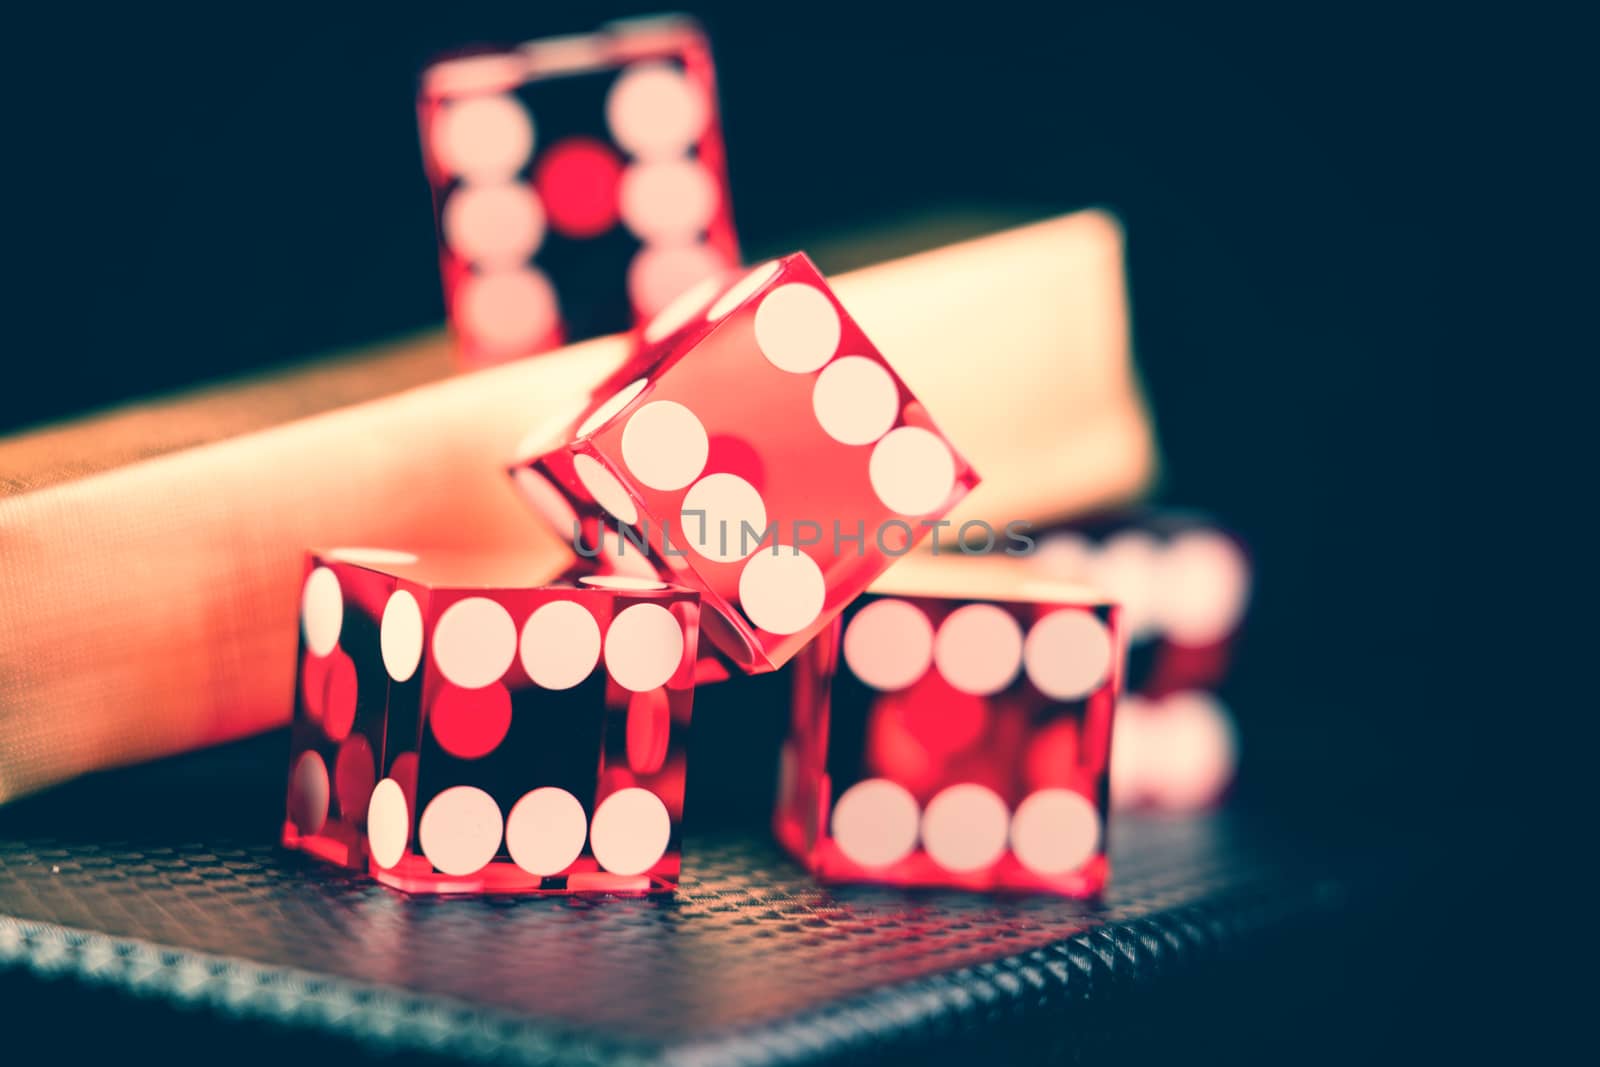 Real boxed Casino Craps dice close up - Shallow depth of field